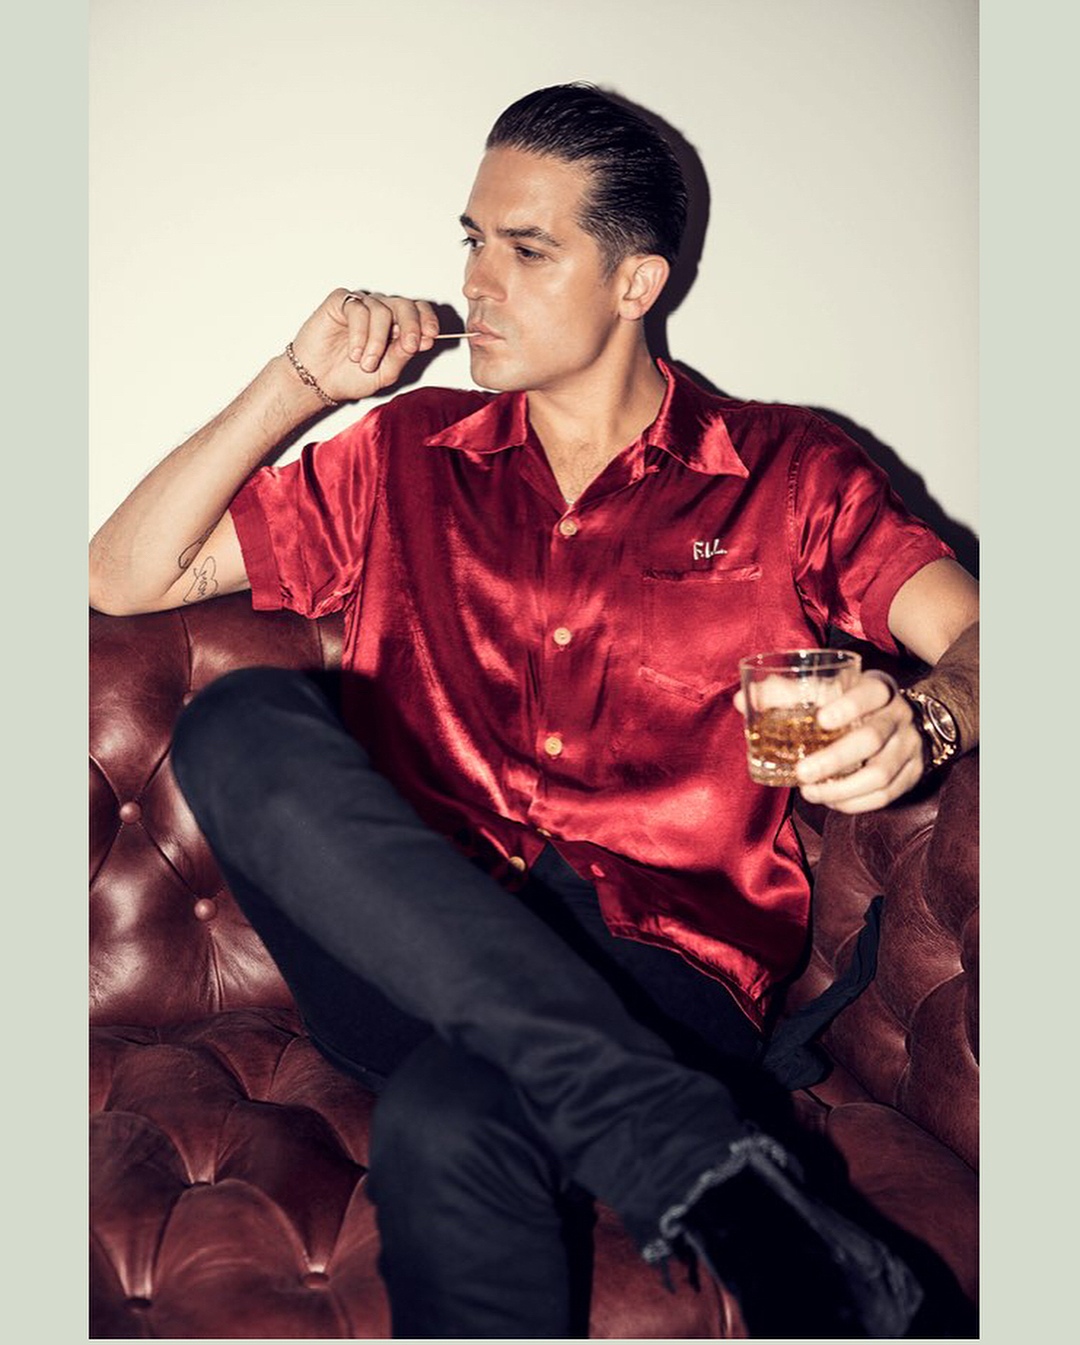 G-Eazy photo 78 of 917 pics, wallpaper - photo #1045750 - ThePlace2